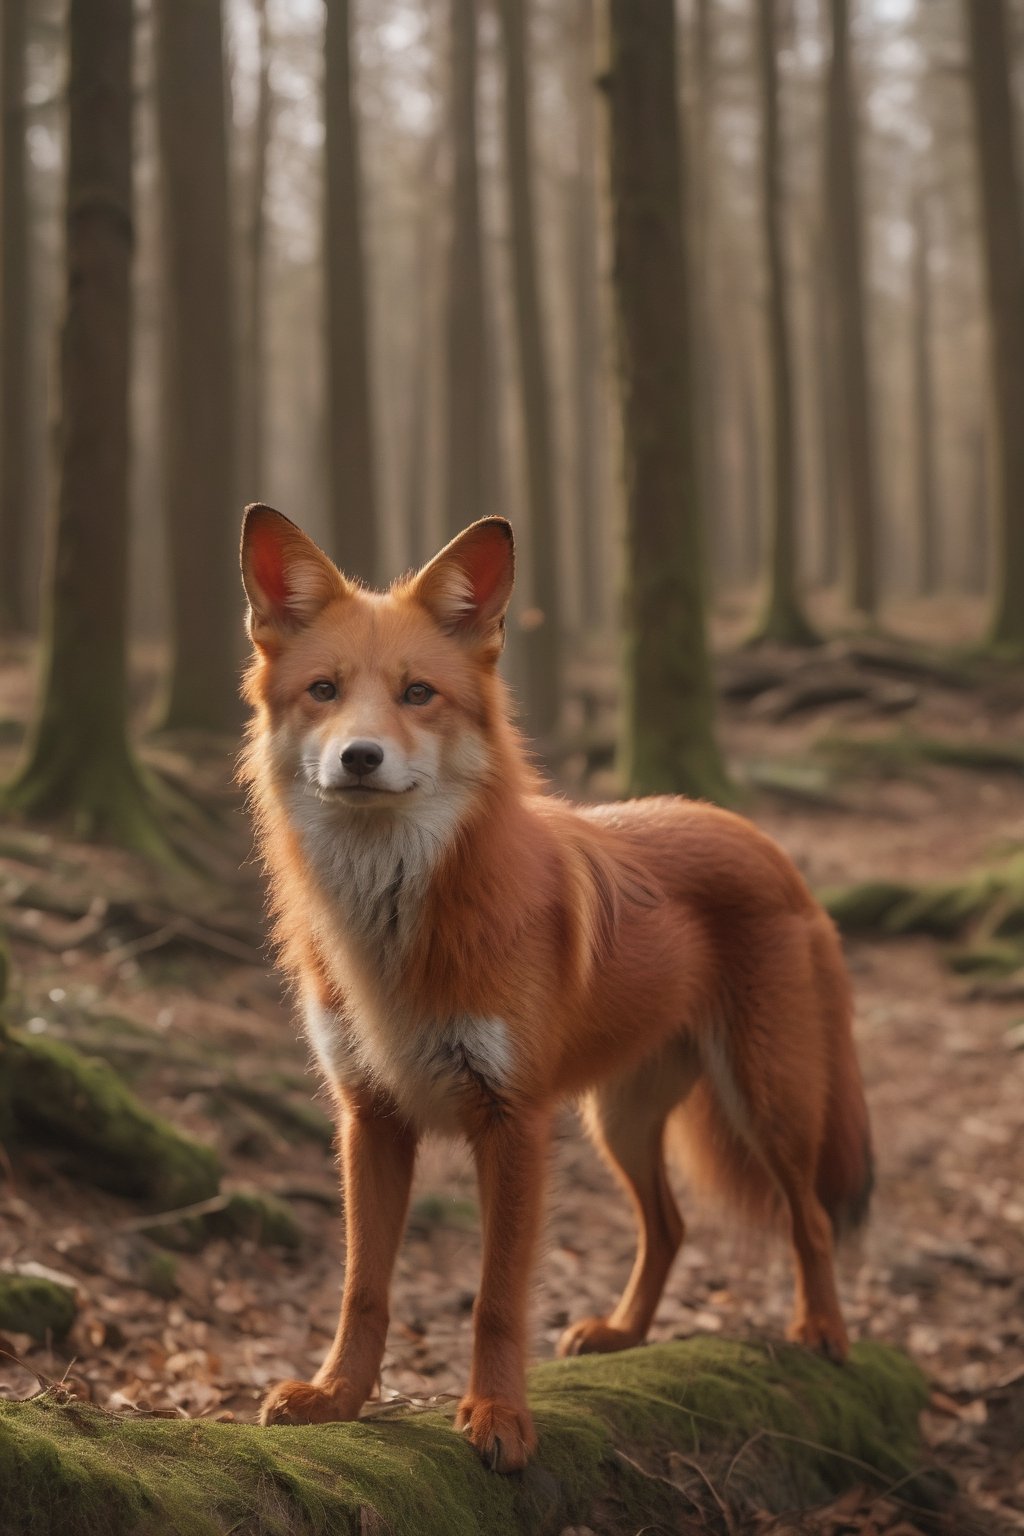 Realistic photo of the red [dog : fox with (long dog ears:1.8) : 8] in a forest. Soft fur, delicate wool. High quality, UHD, 8k, 4k, detailed, soft light, DSLR quality, stock quality, professional,  BBC world, running